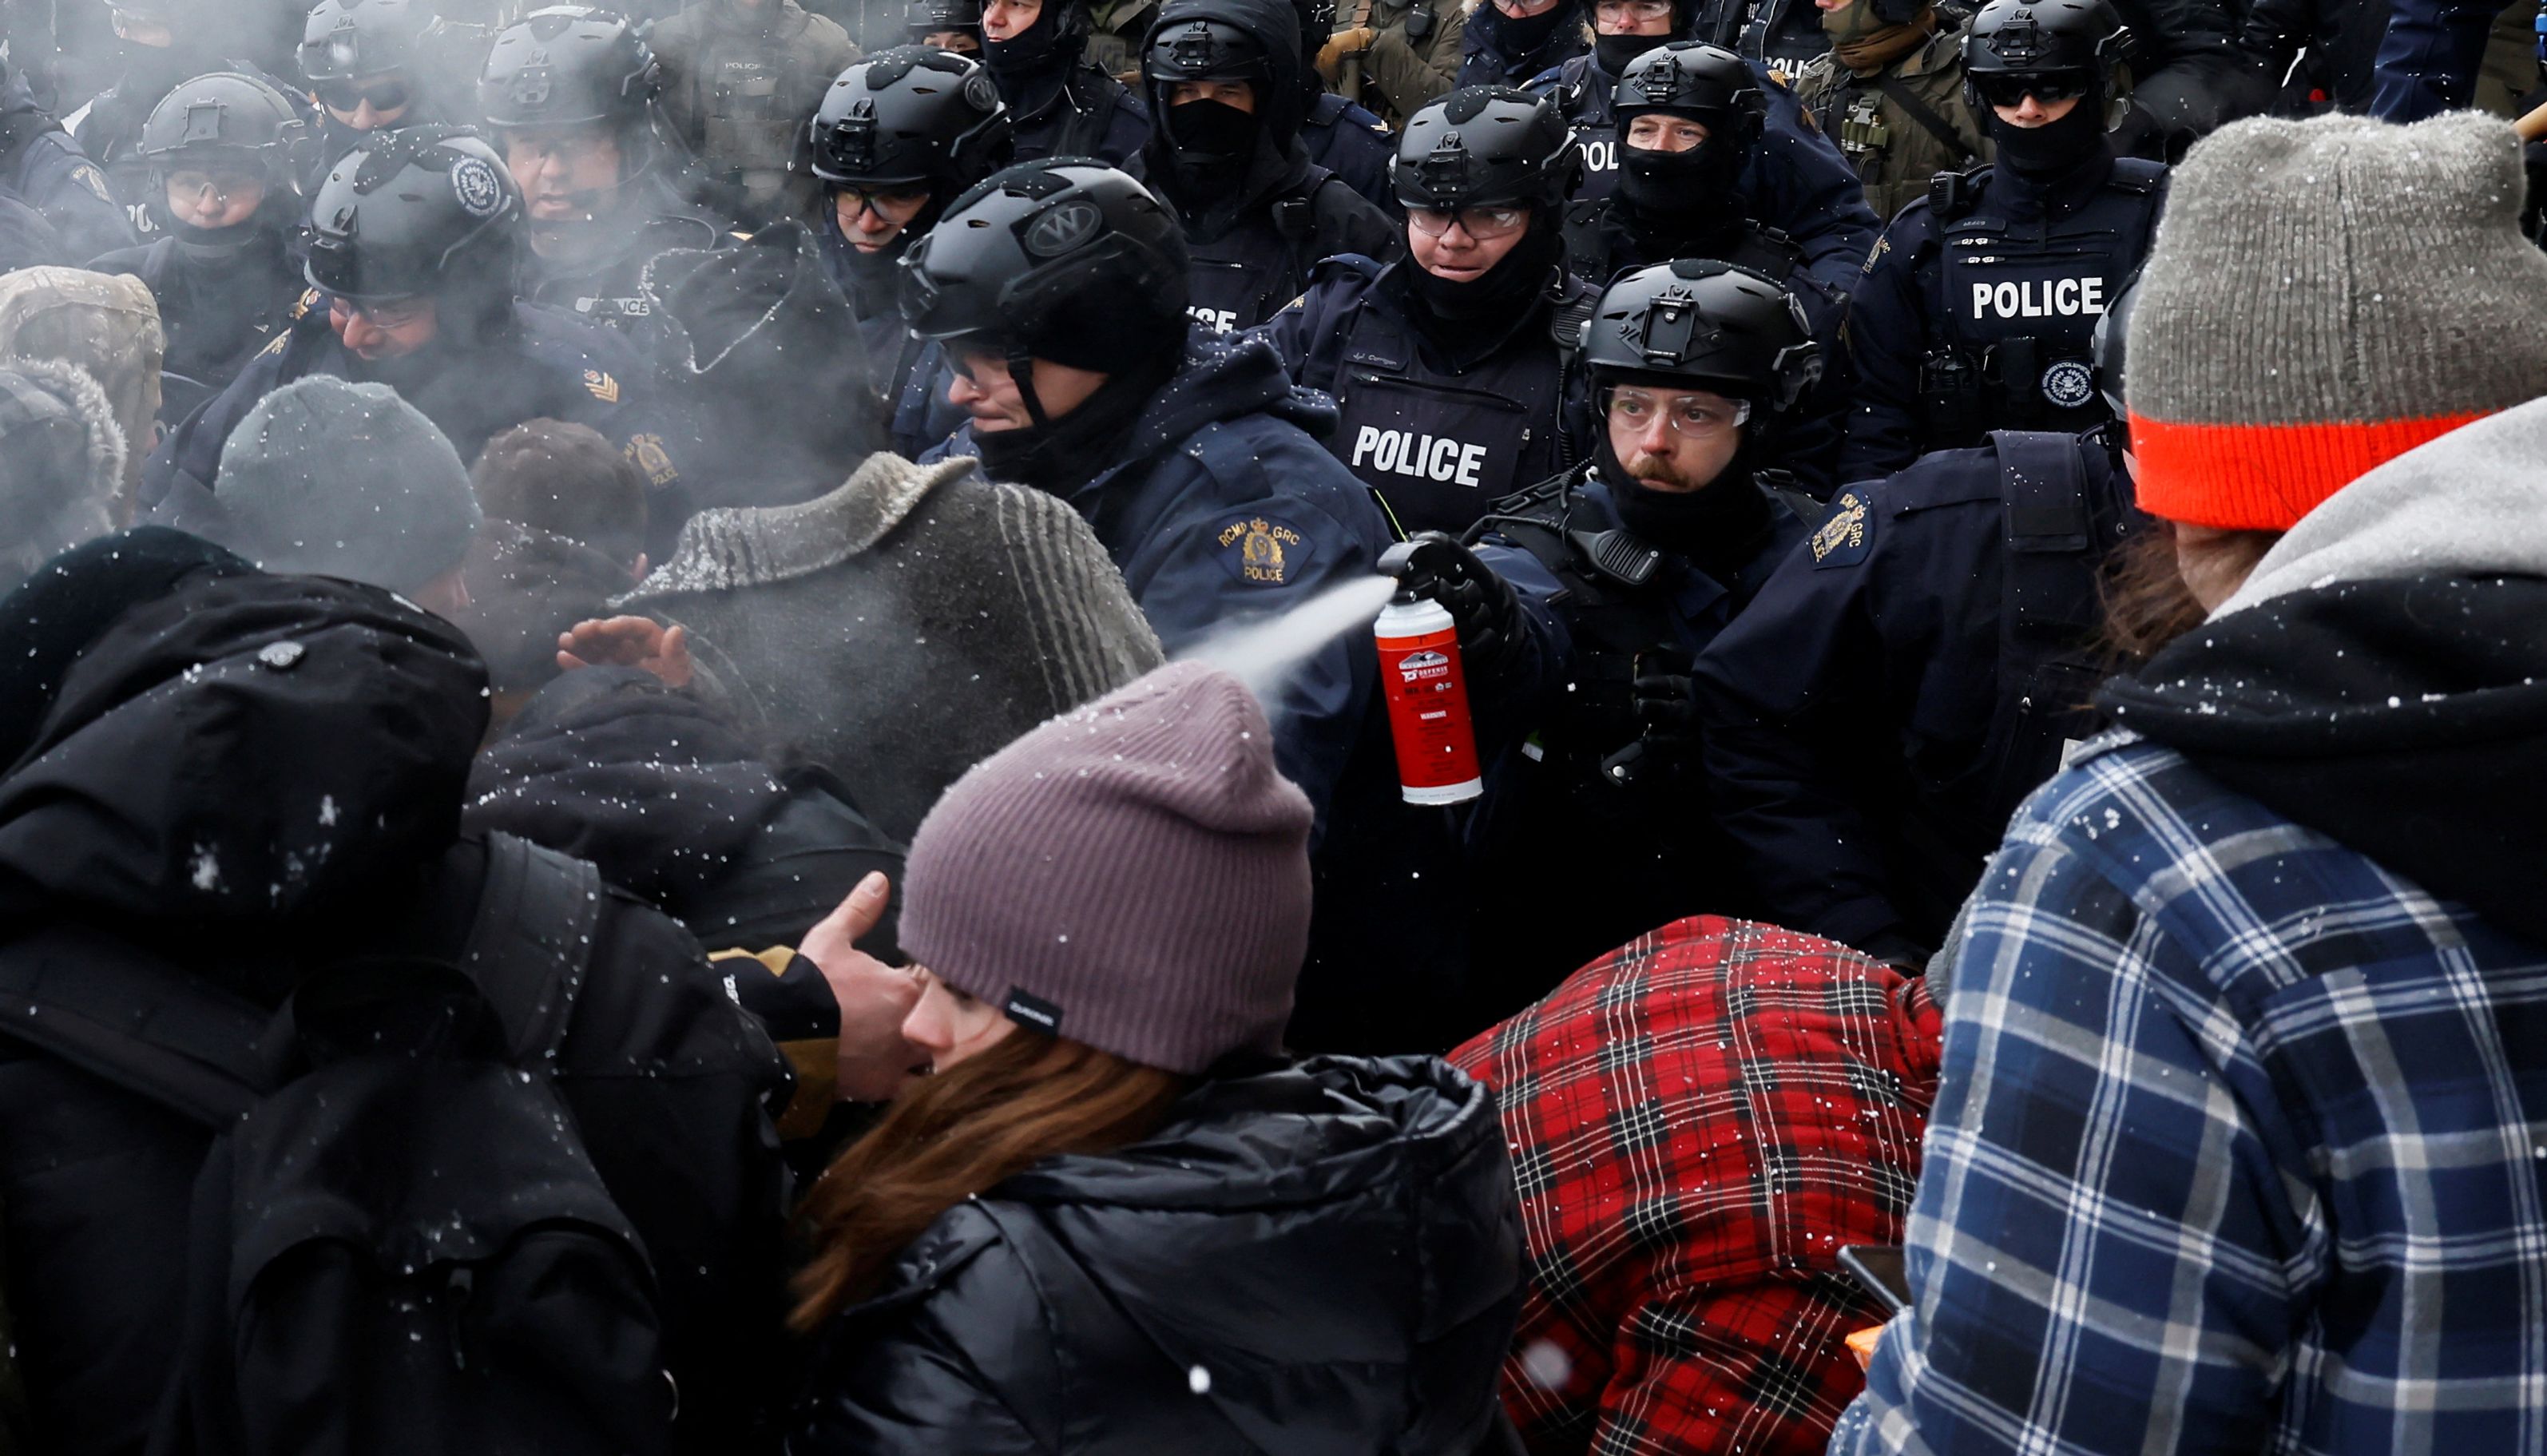 Canadian police officers faced off with protesters in Ottawa, Canada, on Saturday